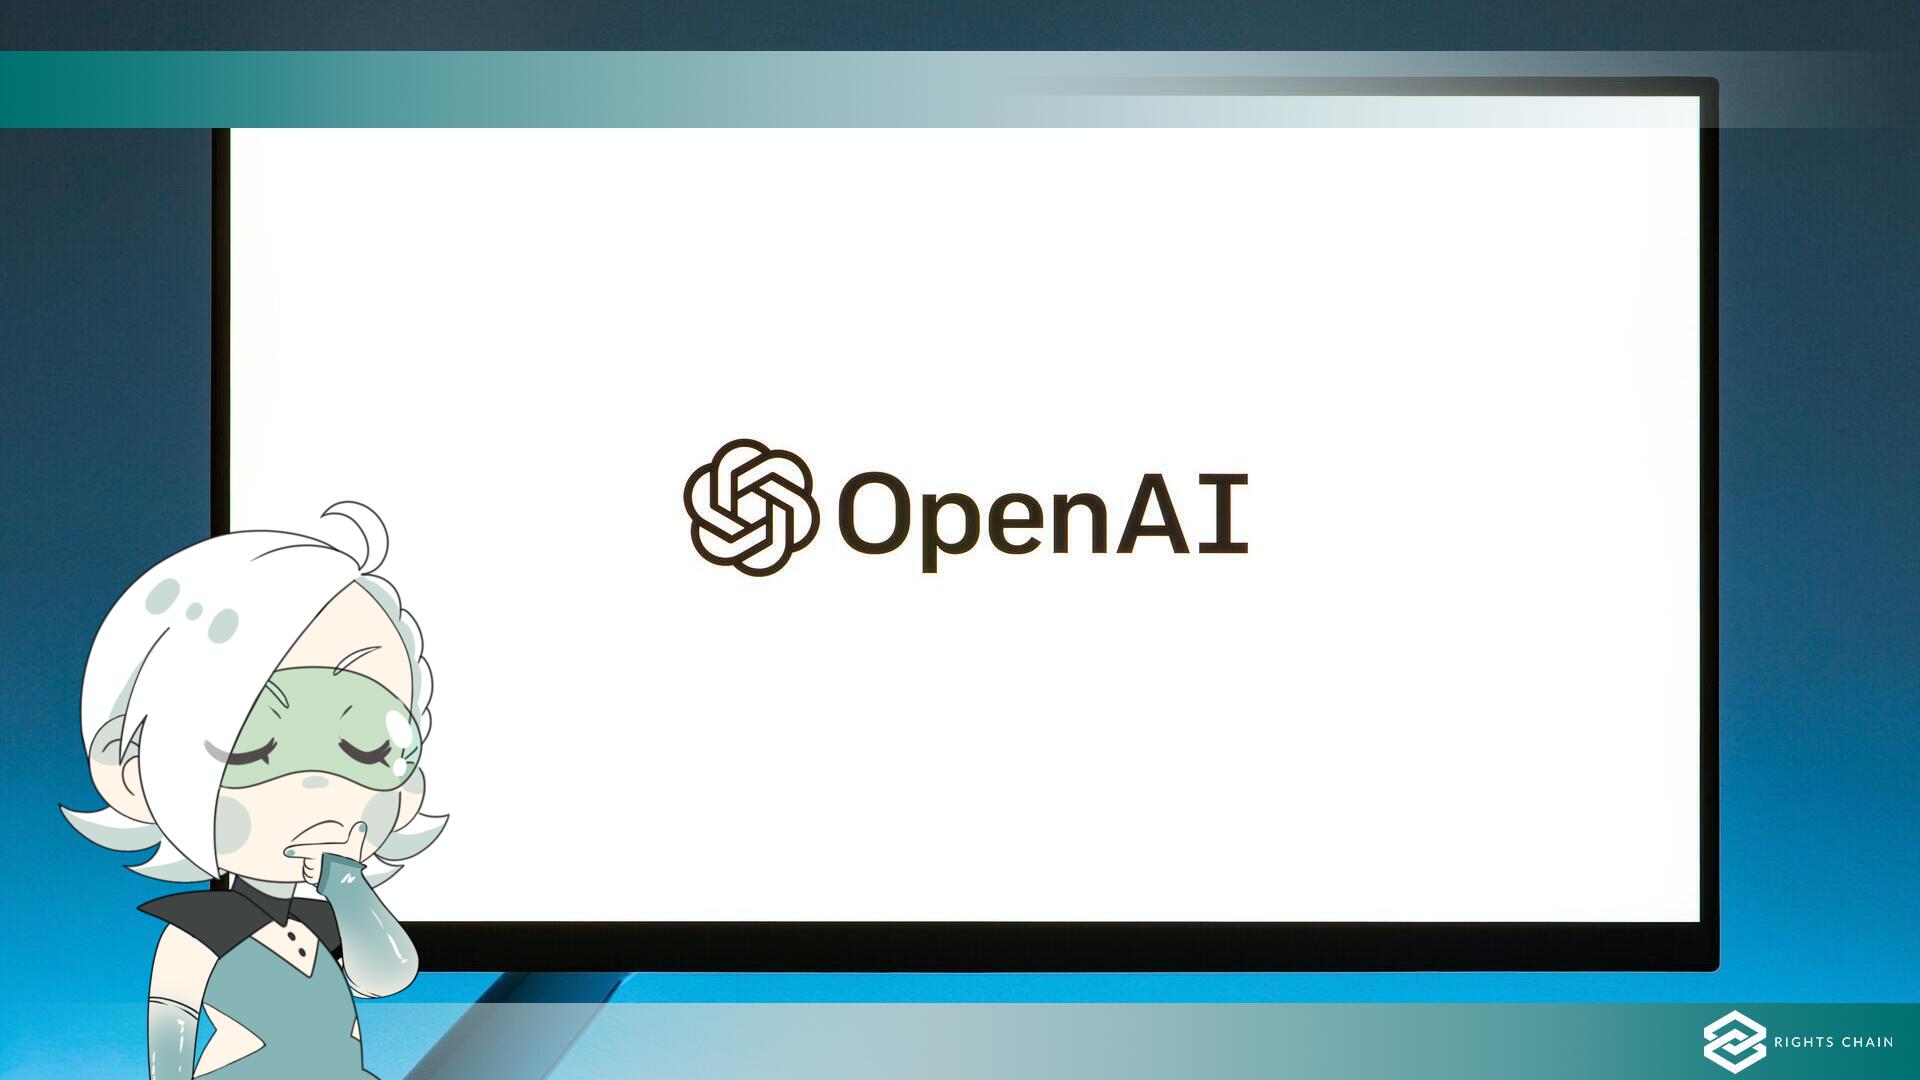  Sam Altman Out at OpenAI ‘Effective Immediately’.